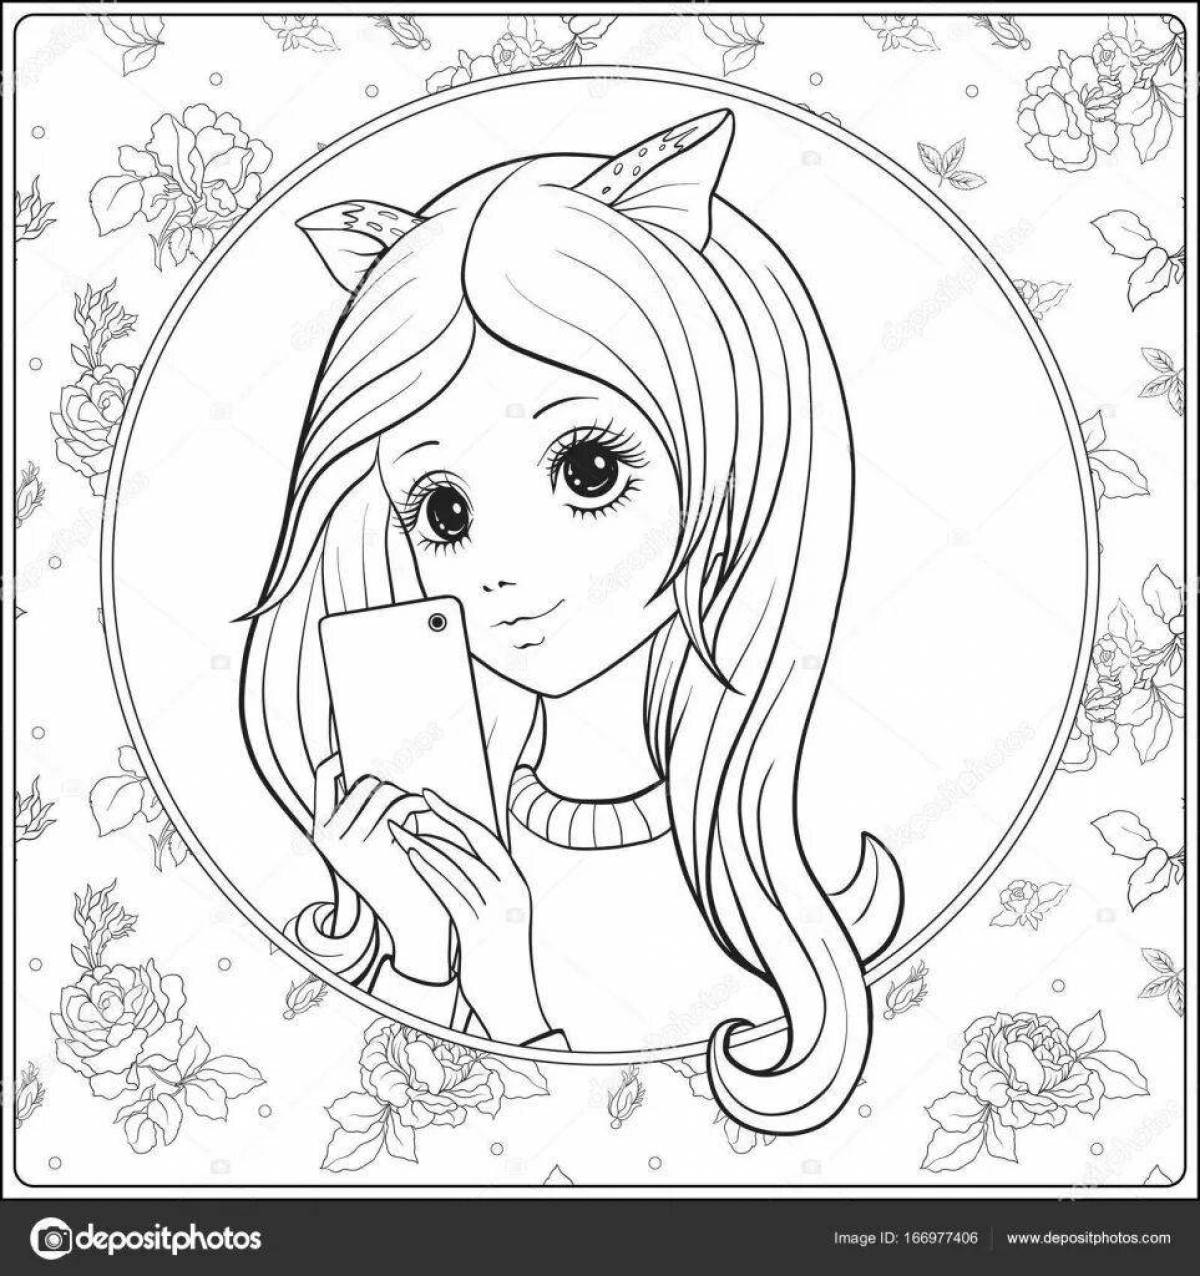 Luminous coloring book of a girl dressed as a unicorn